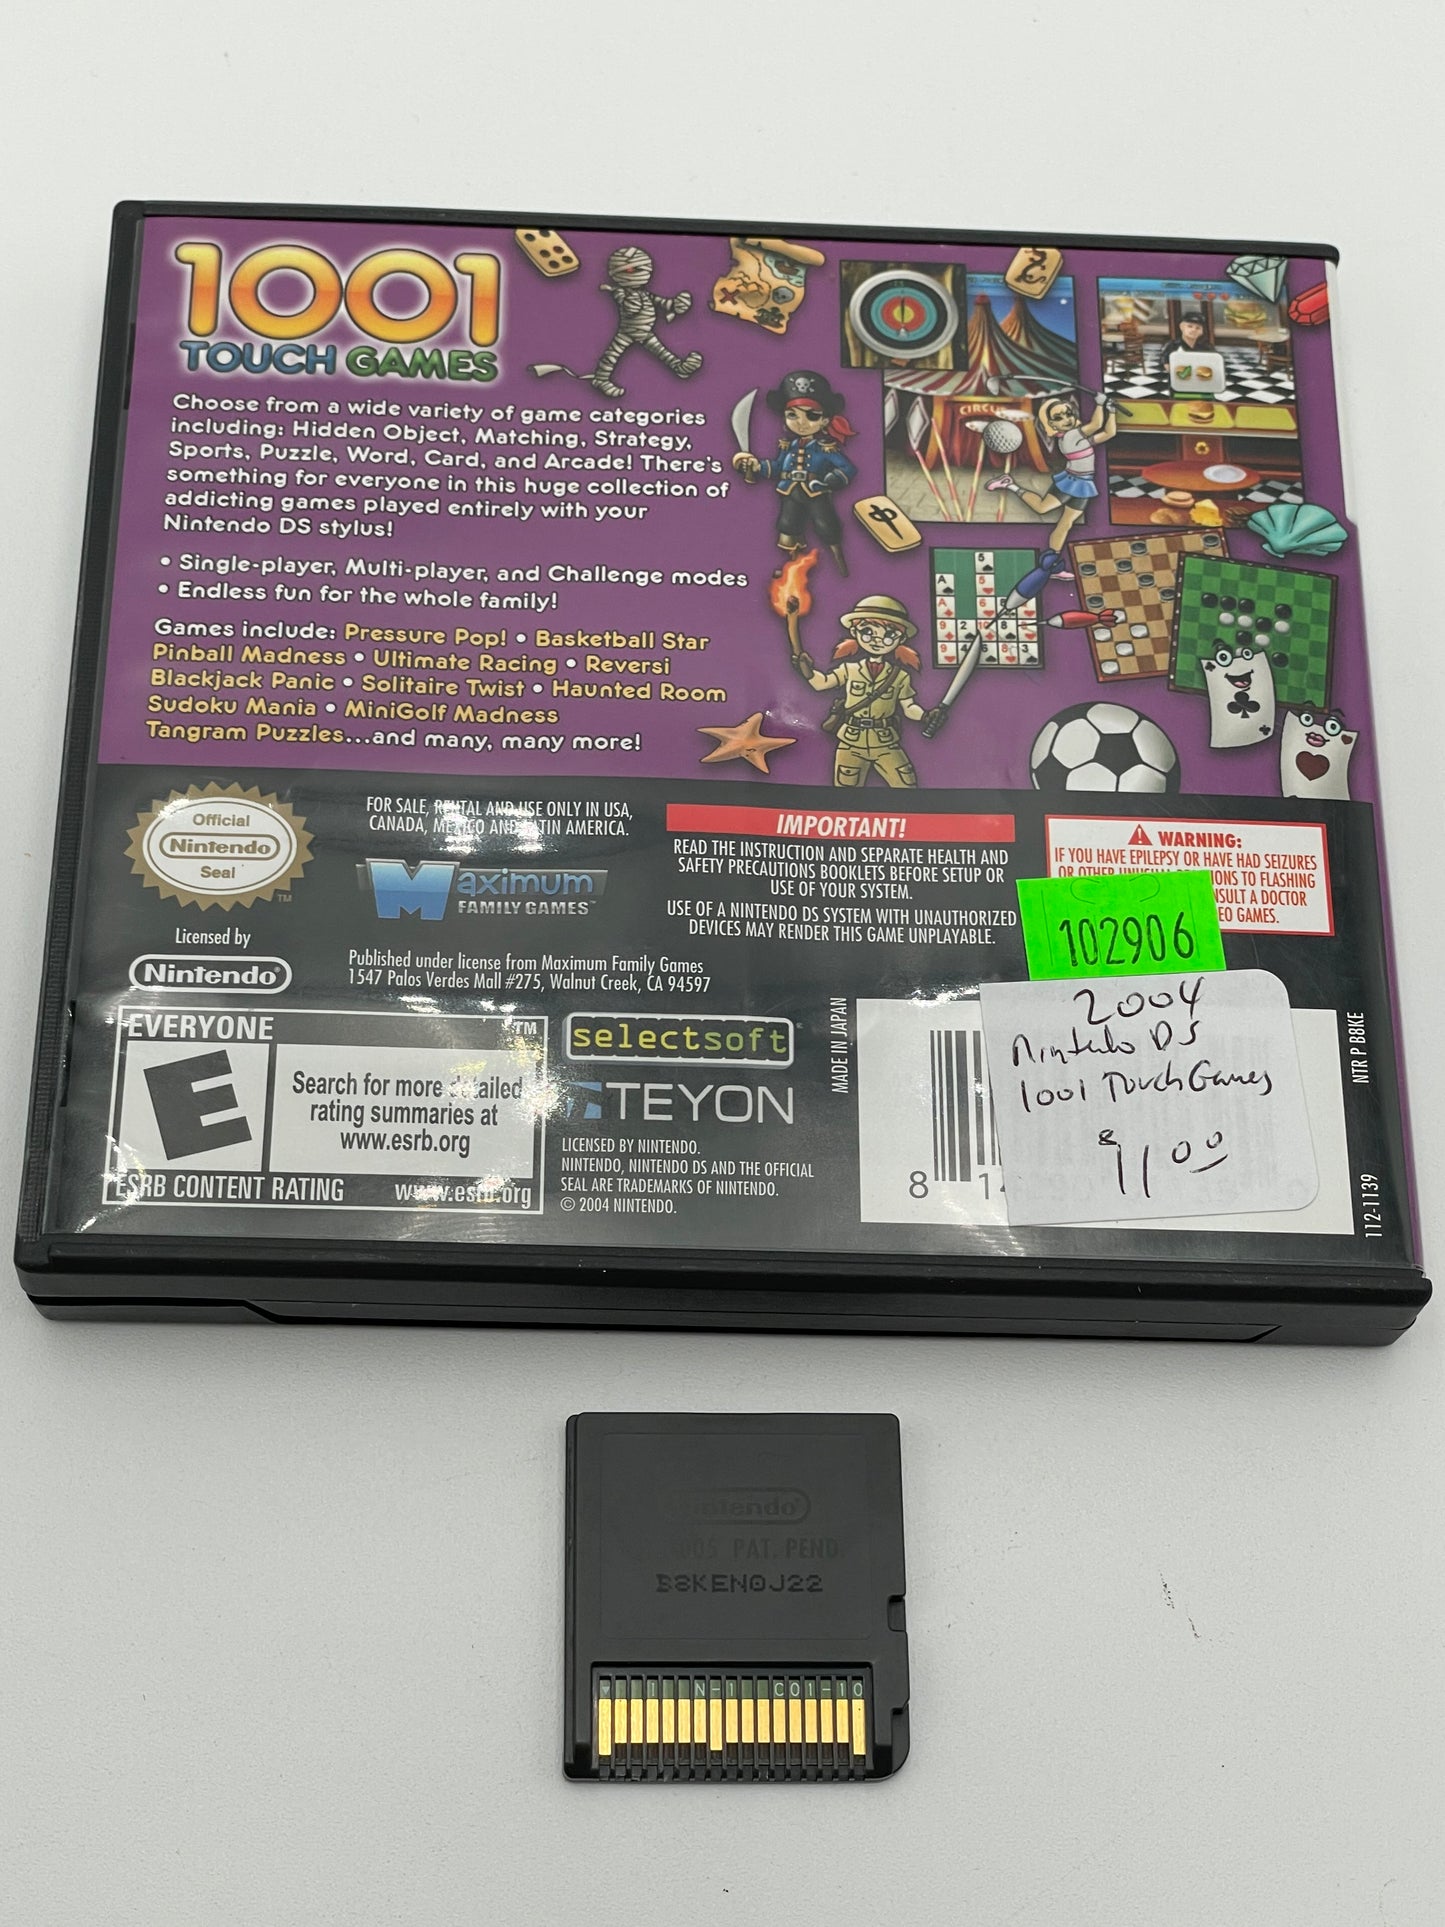 Nintendo DS - 1001 Touch Games 2004 #102906